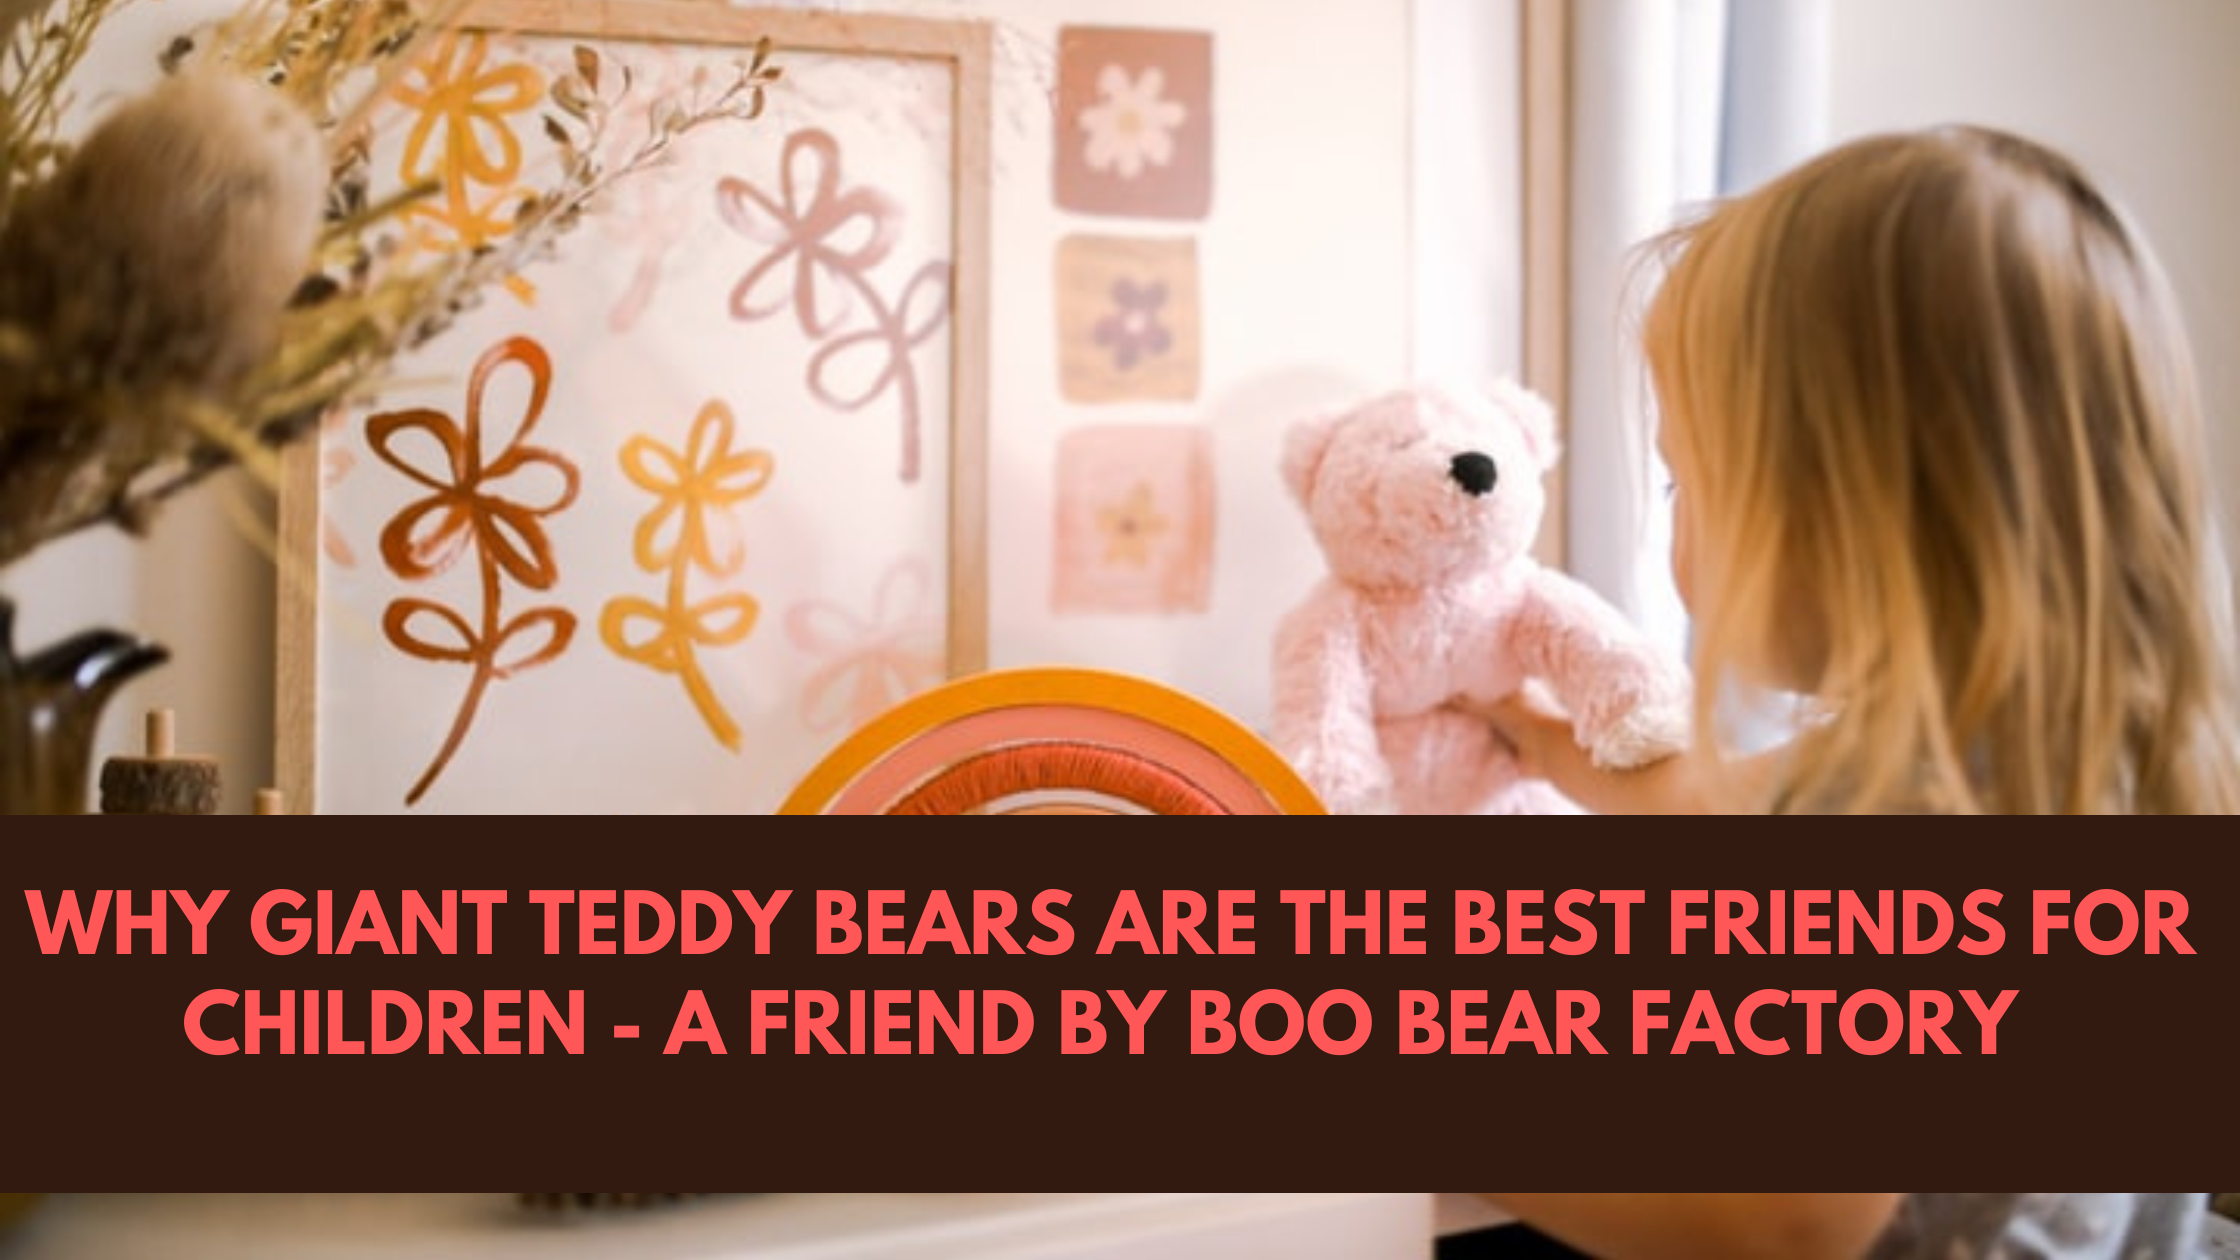 Why Giant Teddy Bears are the Best Friends for Children - A Friend by Boo Bear Factory